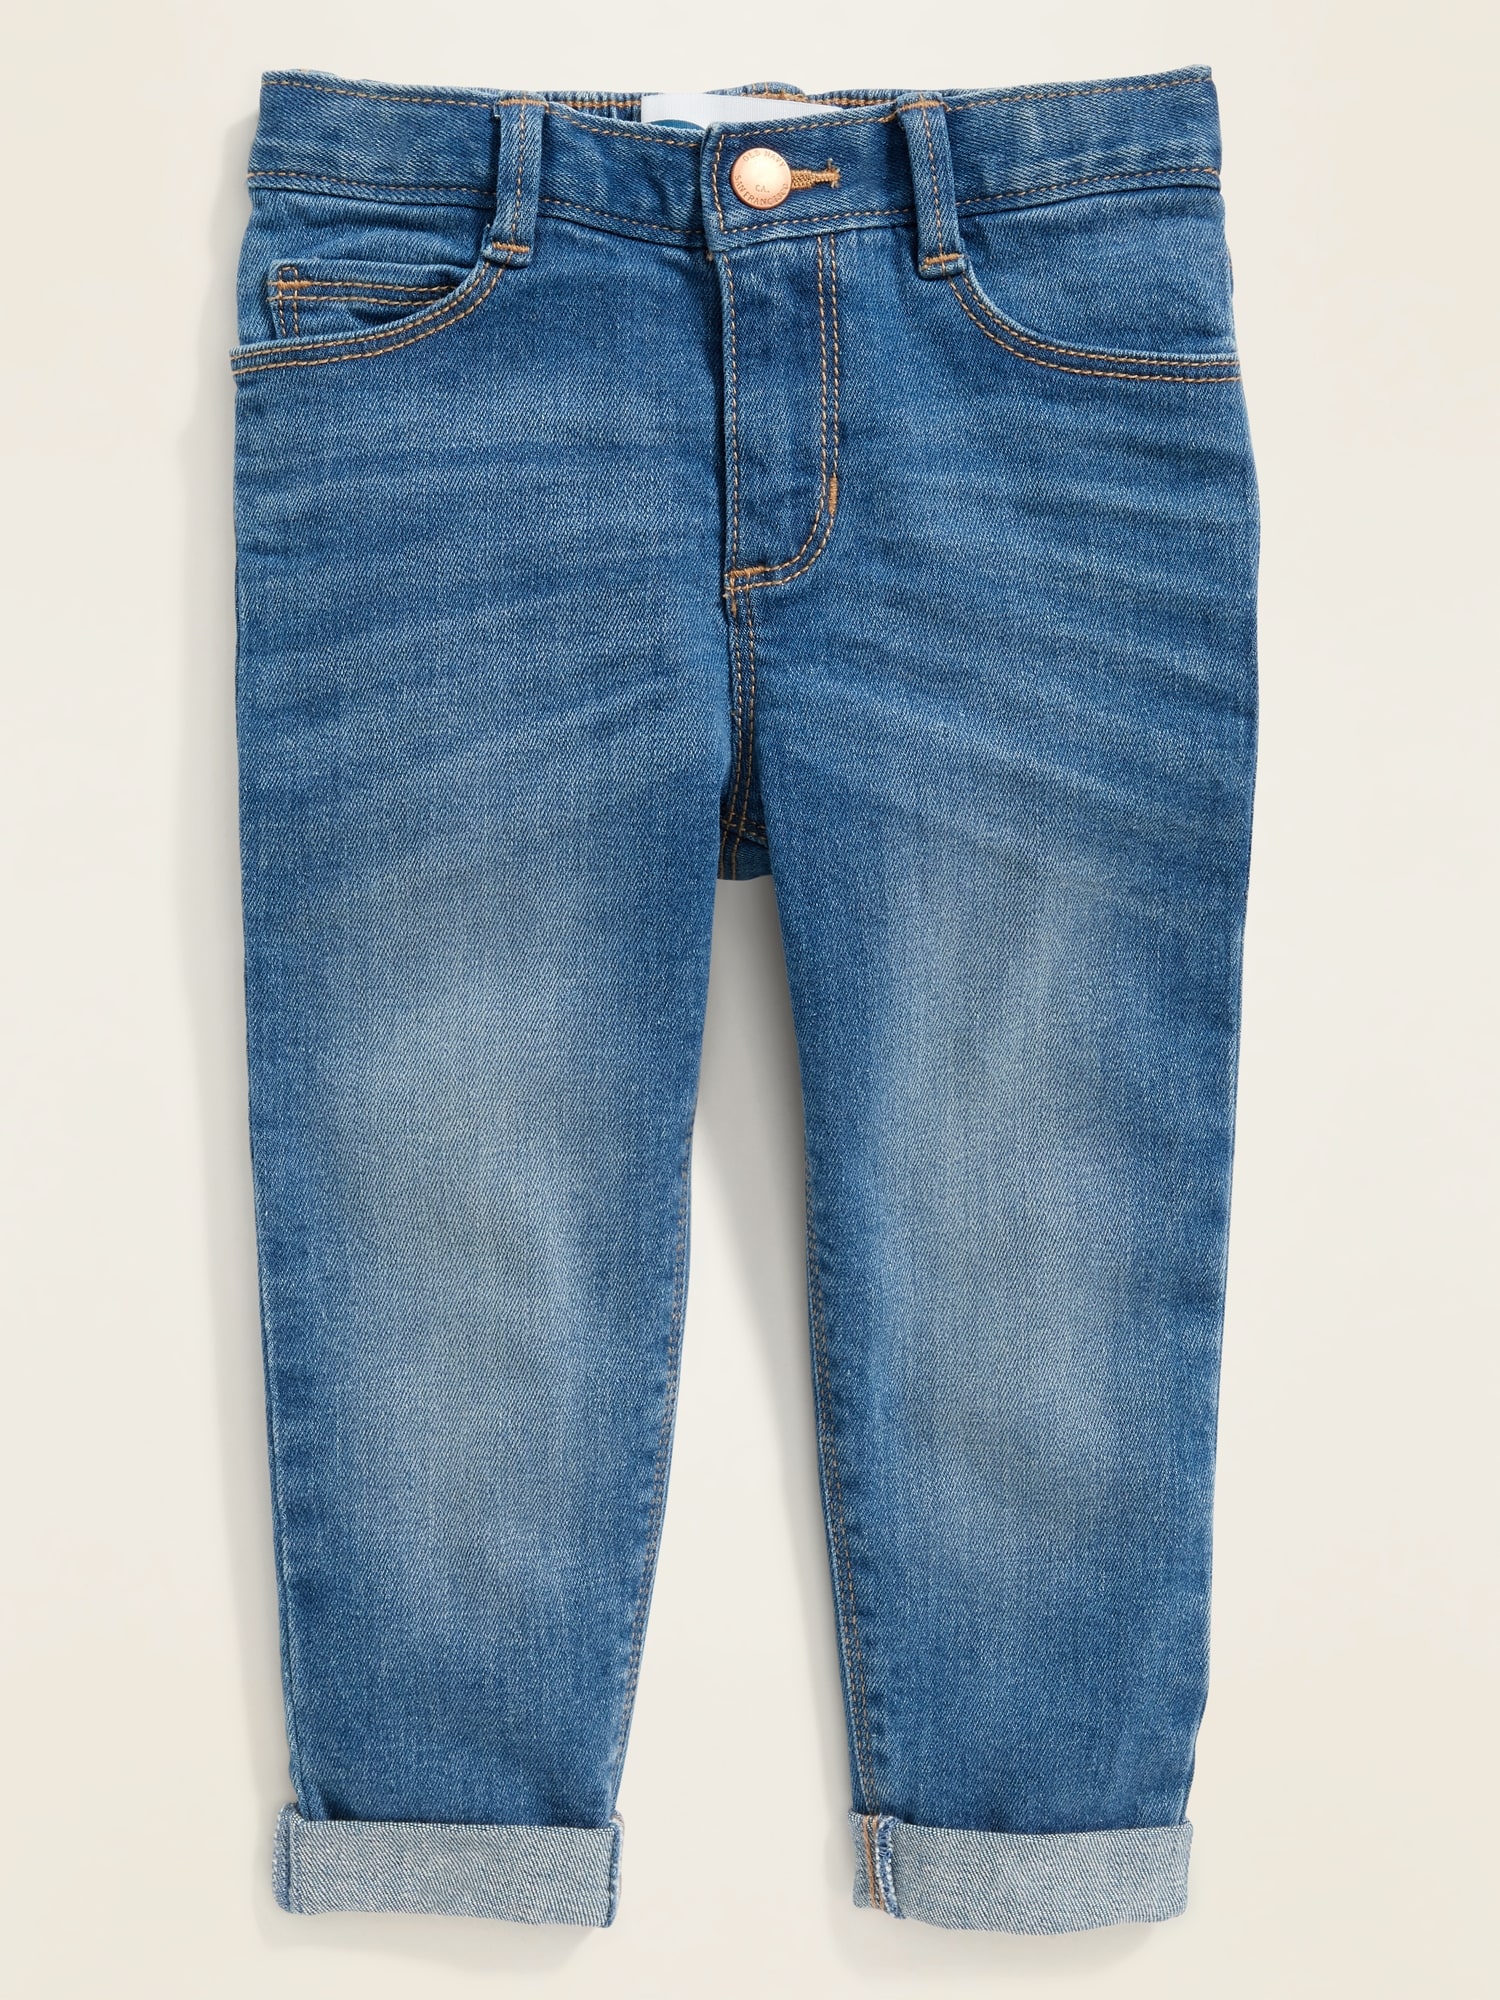 4t jeans